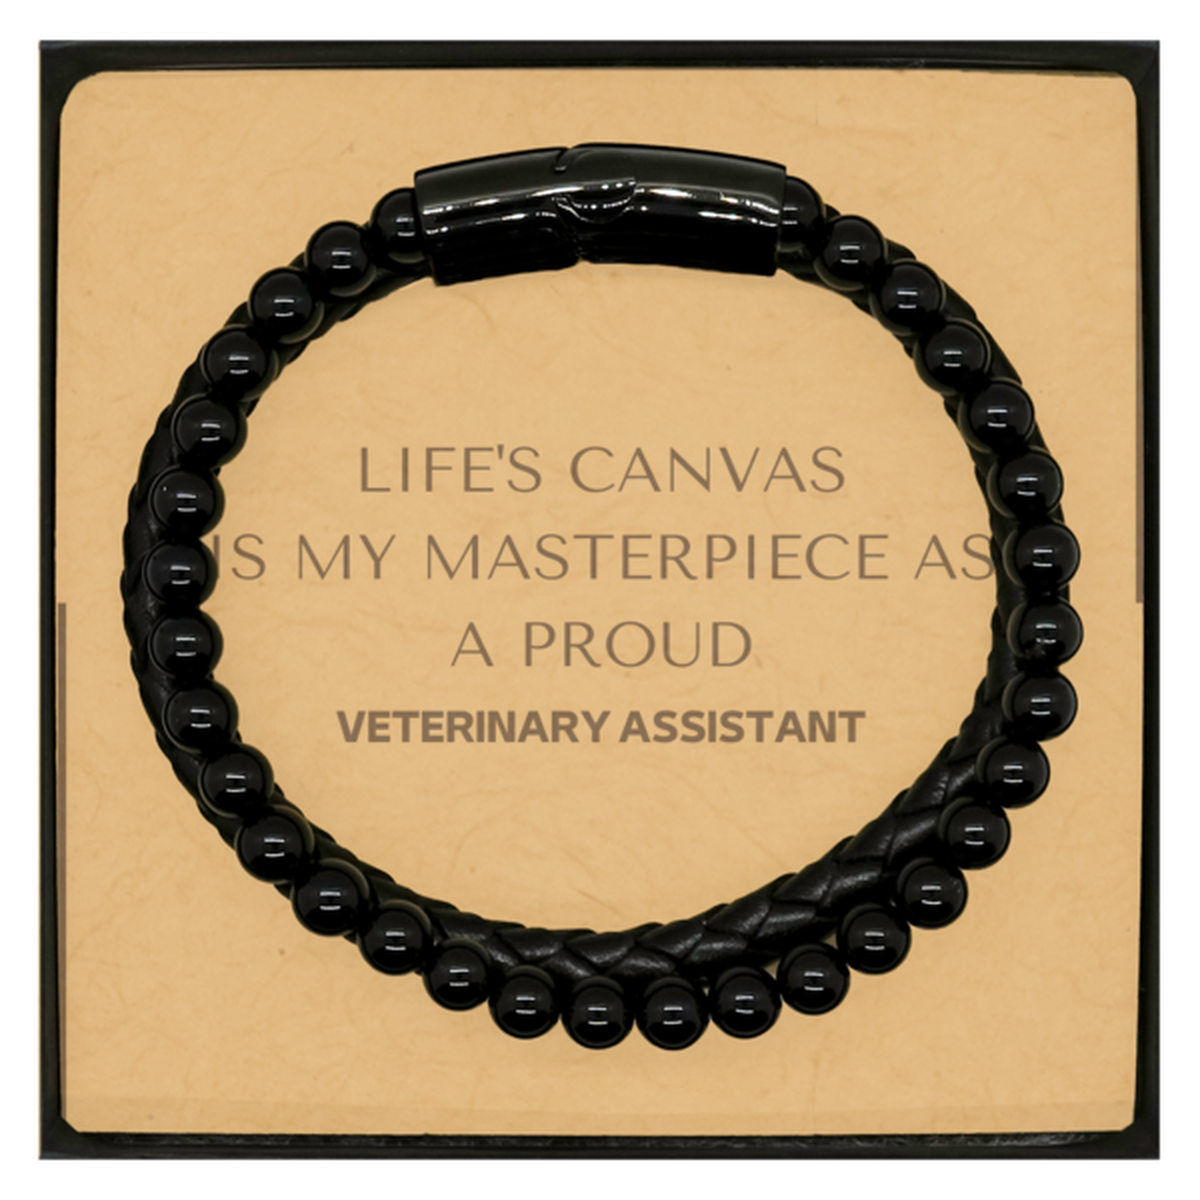 Proud Veterinary Assistant Gifts, Life's canvas is my masterpiece, Epic Birthday Christmas Unique Stone Leather Bracelets For Veterinary Assistant, Coworkers, Men, Women, Friends